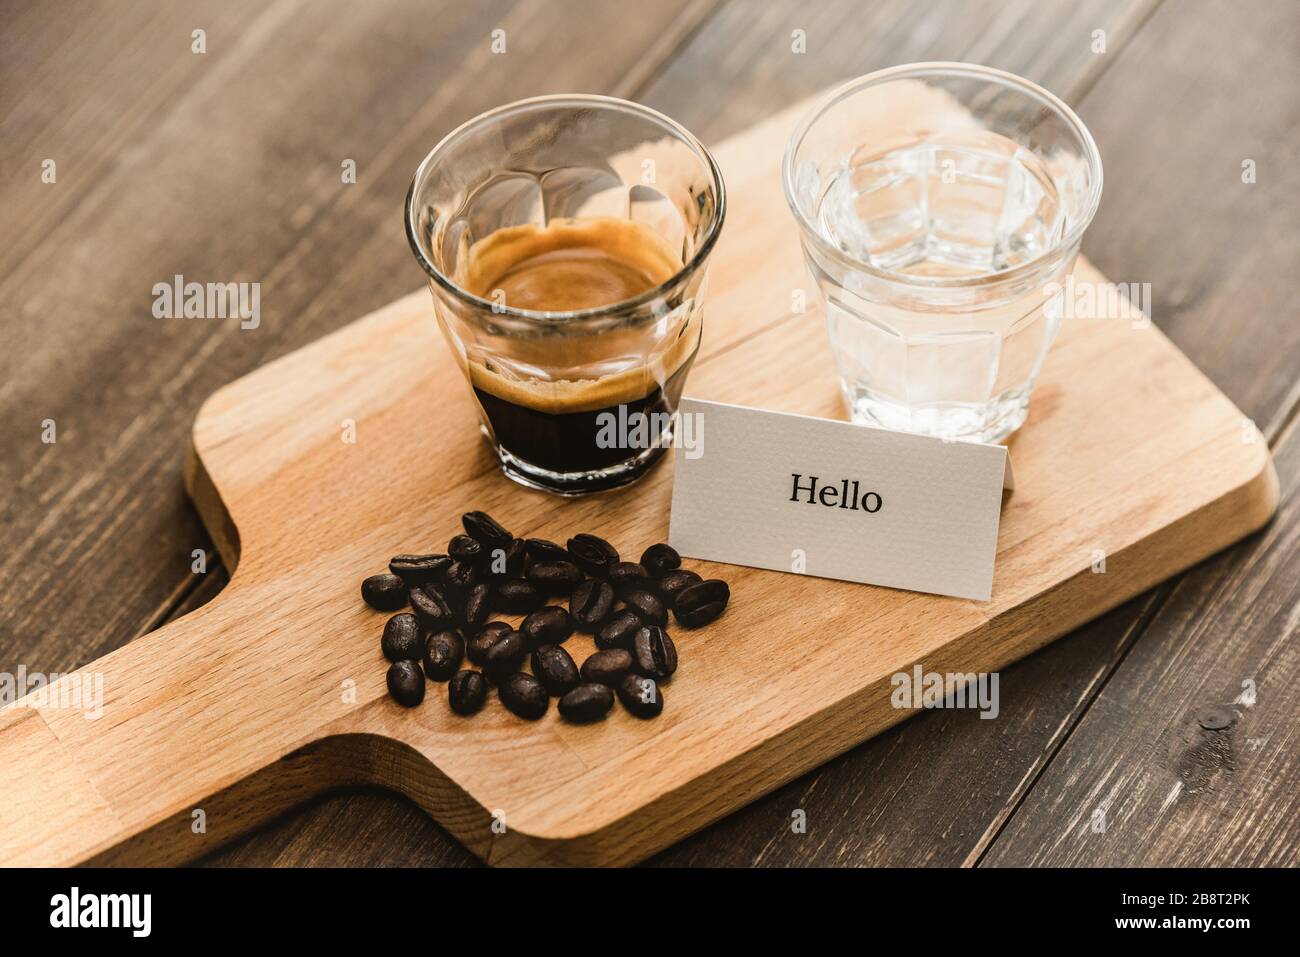 Fresh brewed black Espresso coffee and water in shot glasses served on wooden platter ready to drink Stock Photo